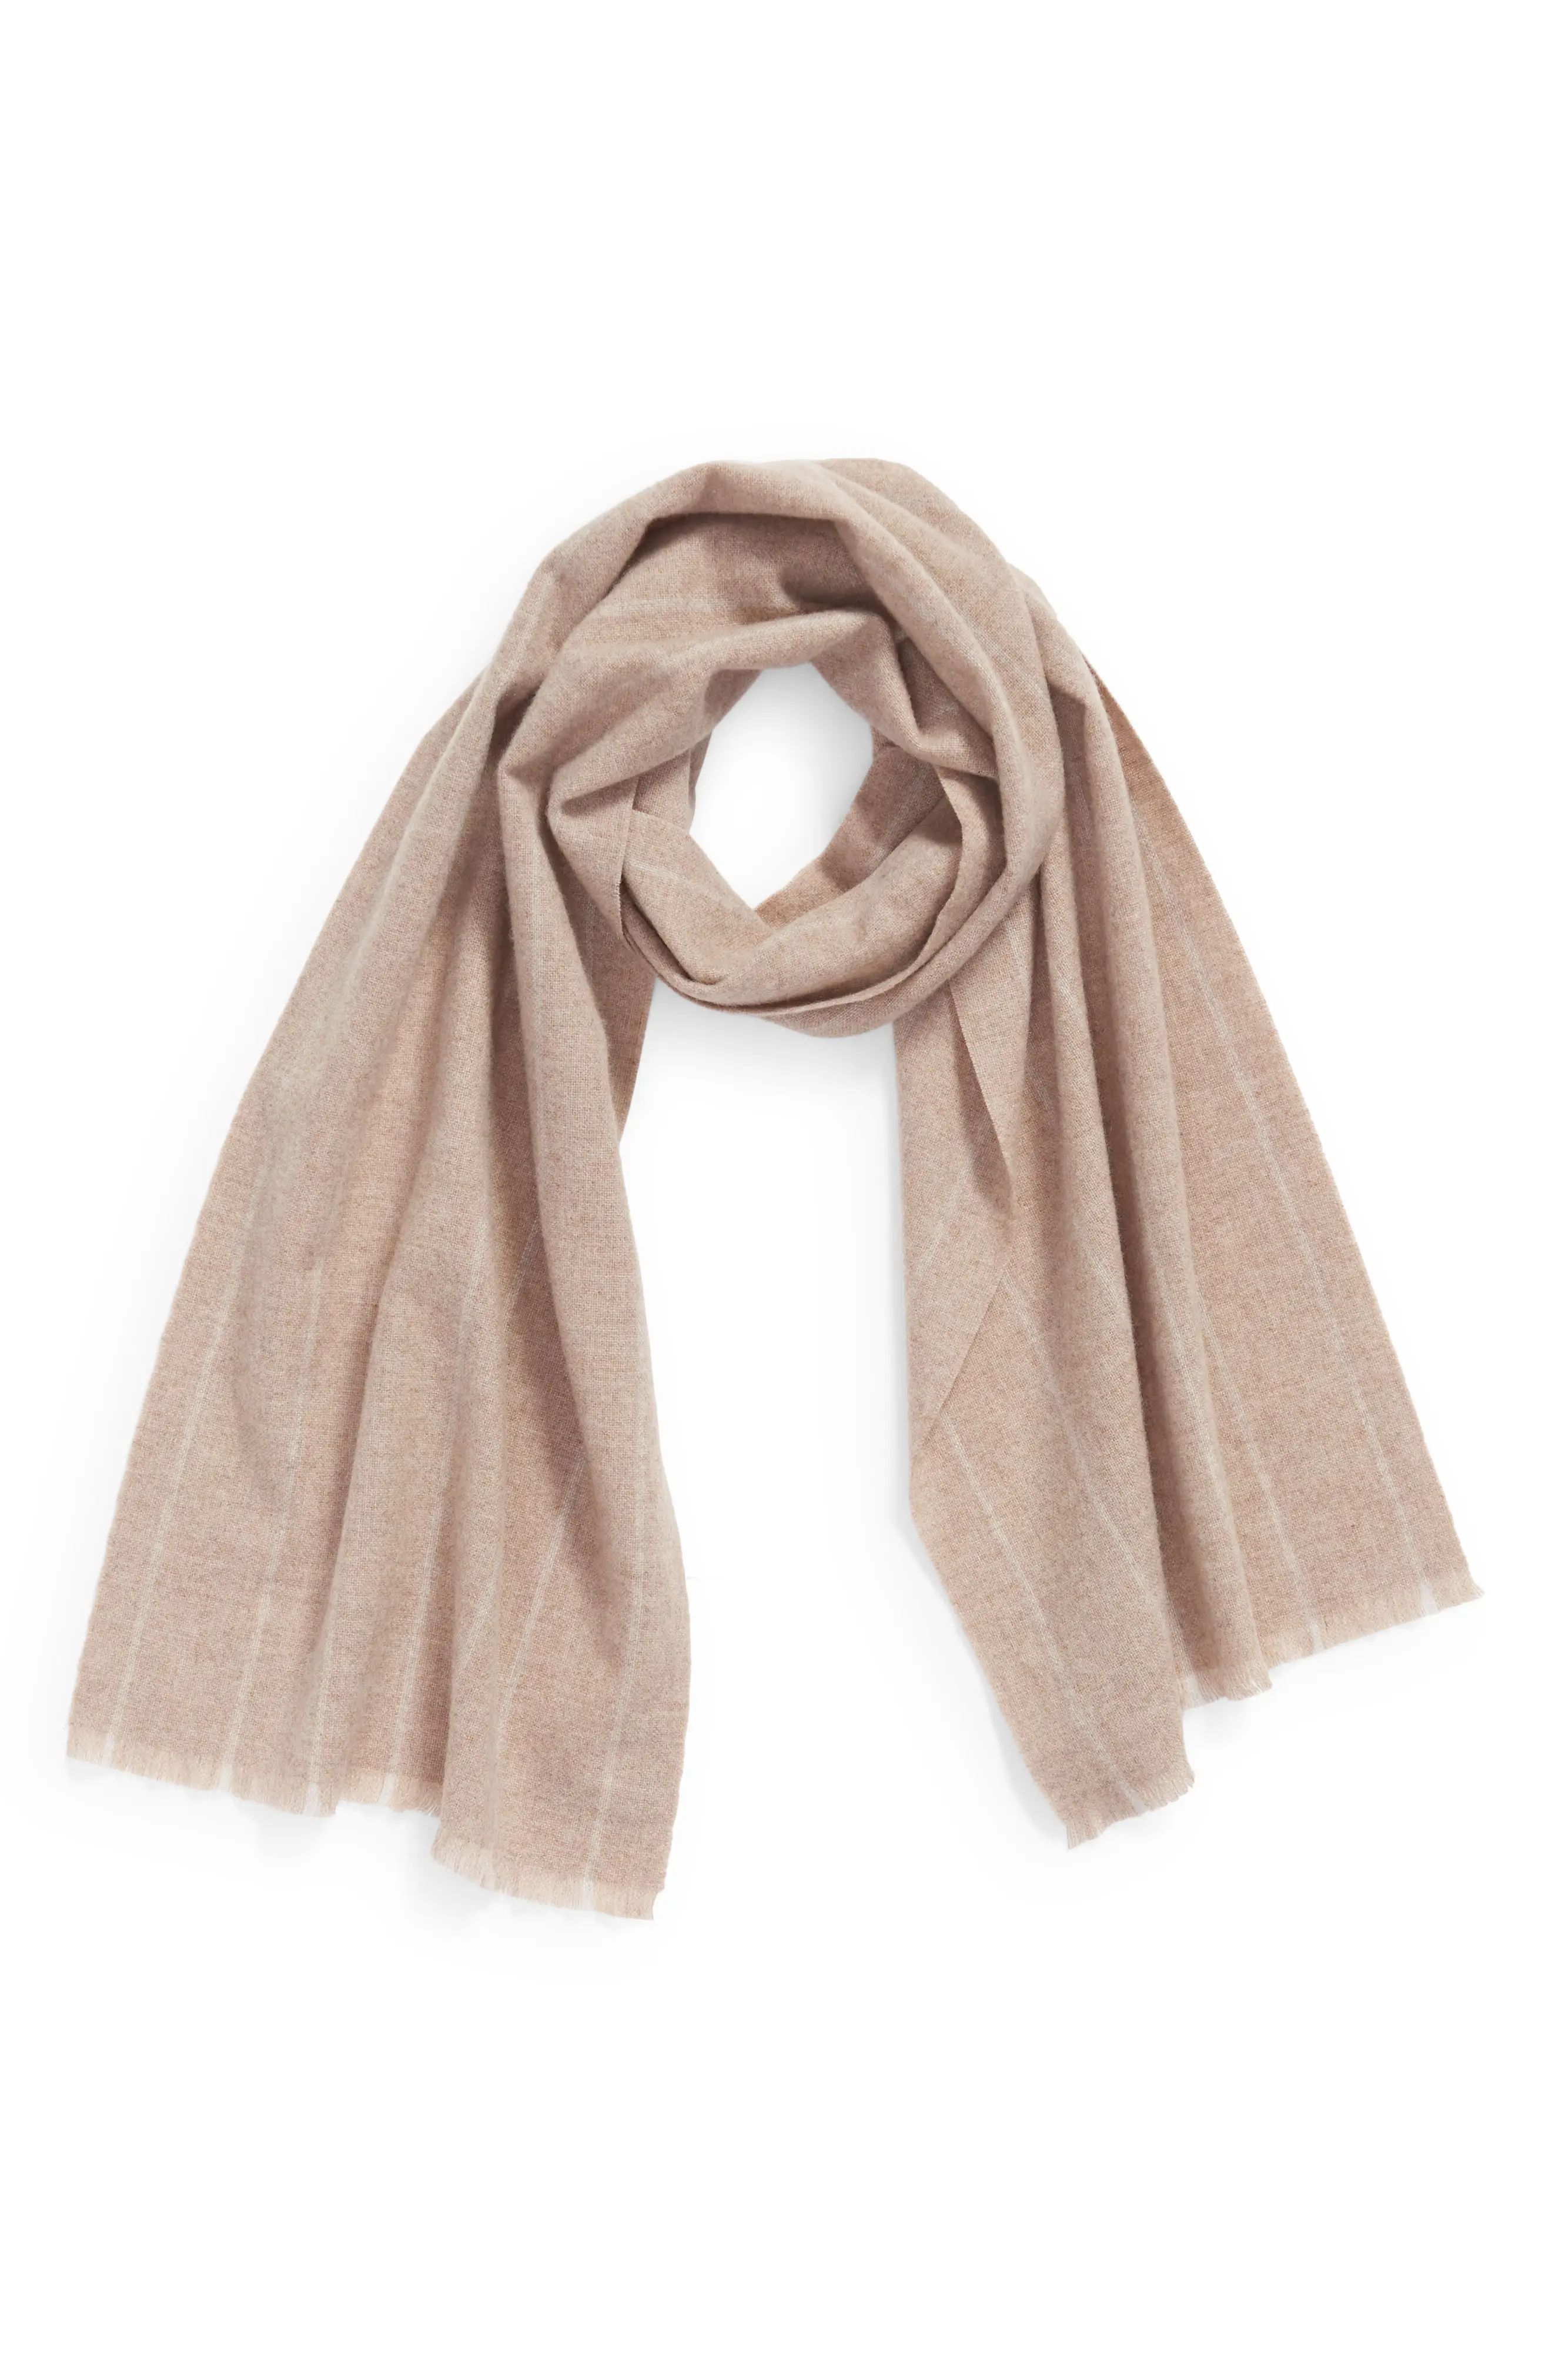 Nordstrom Yarn Dyed Wool & Cashmere Scarf in Tan Combo at Nordstrom | Nordstrom